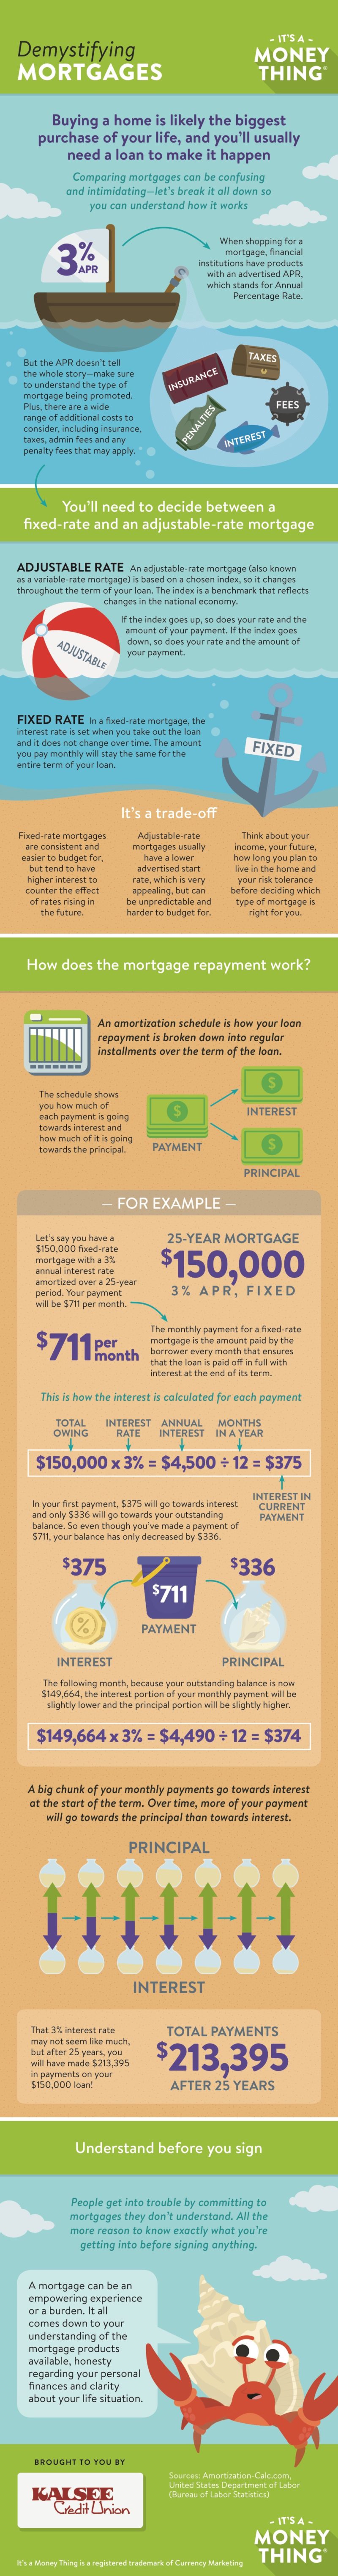 Demystifying Mortgages Infographic, click for transcription